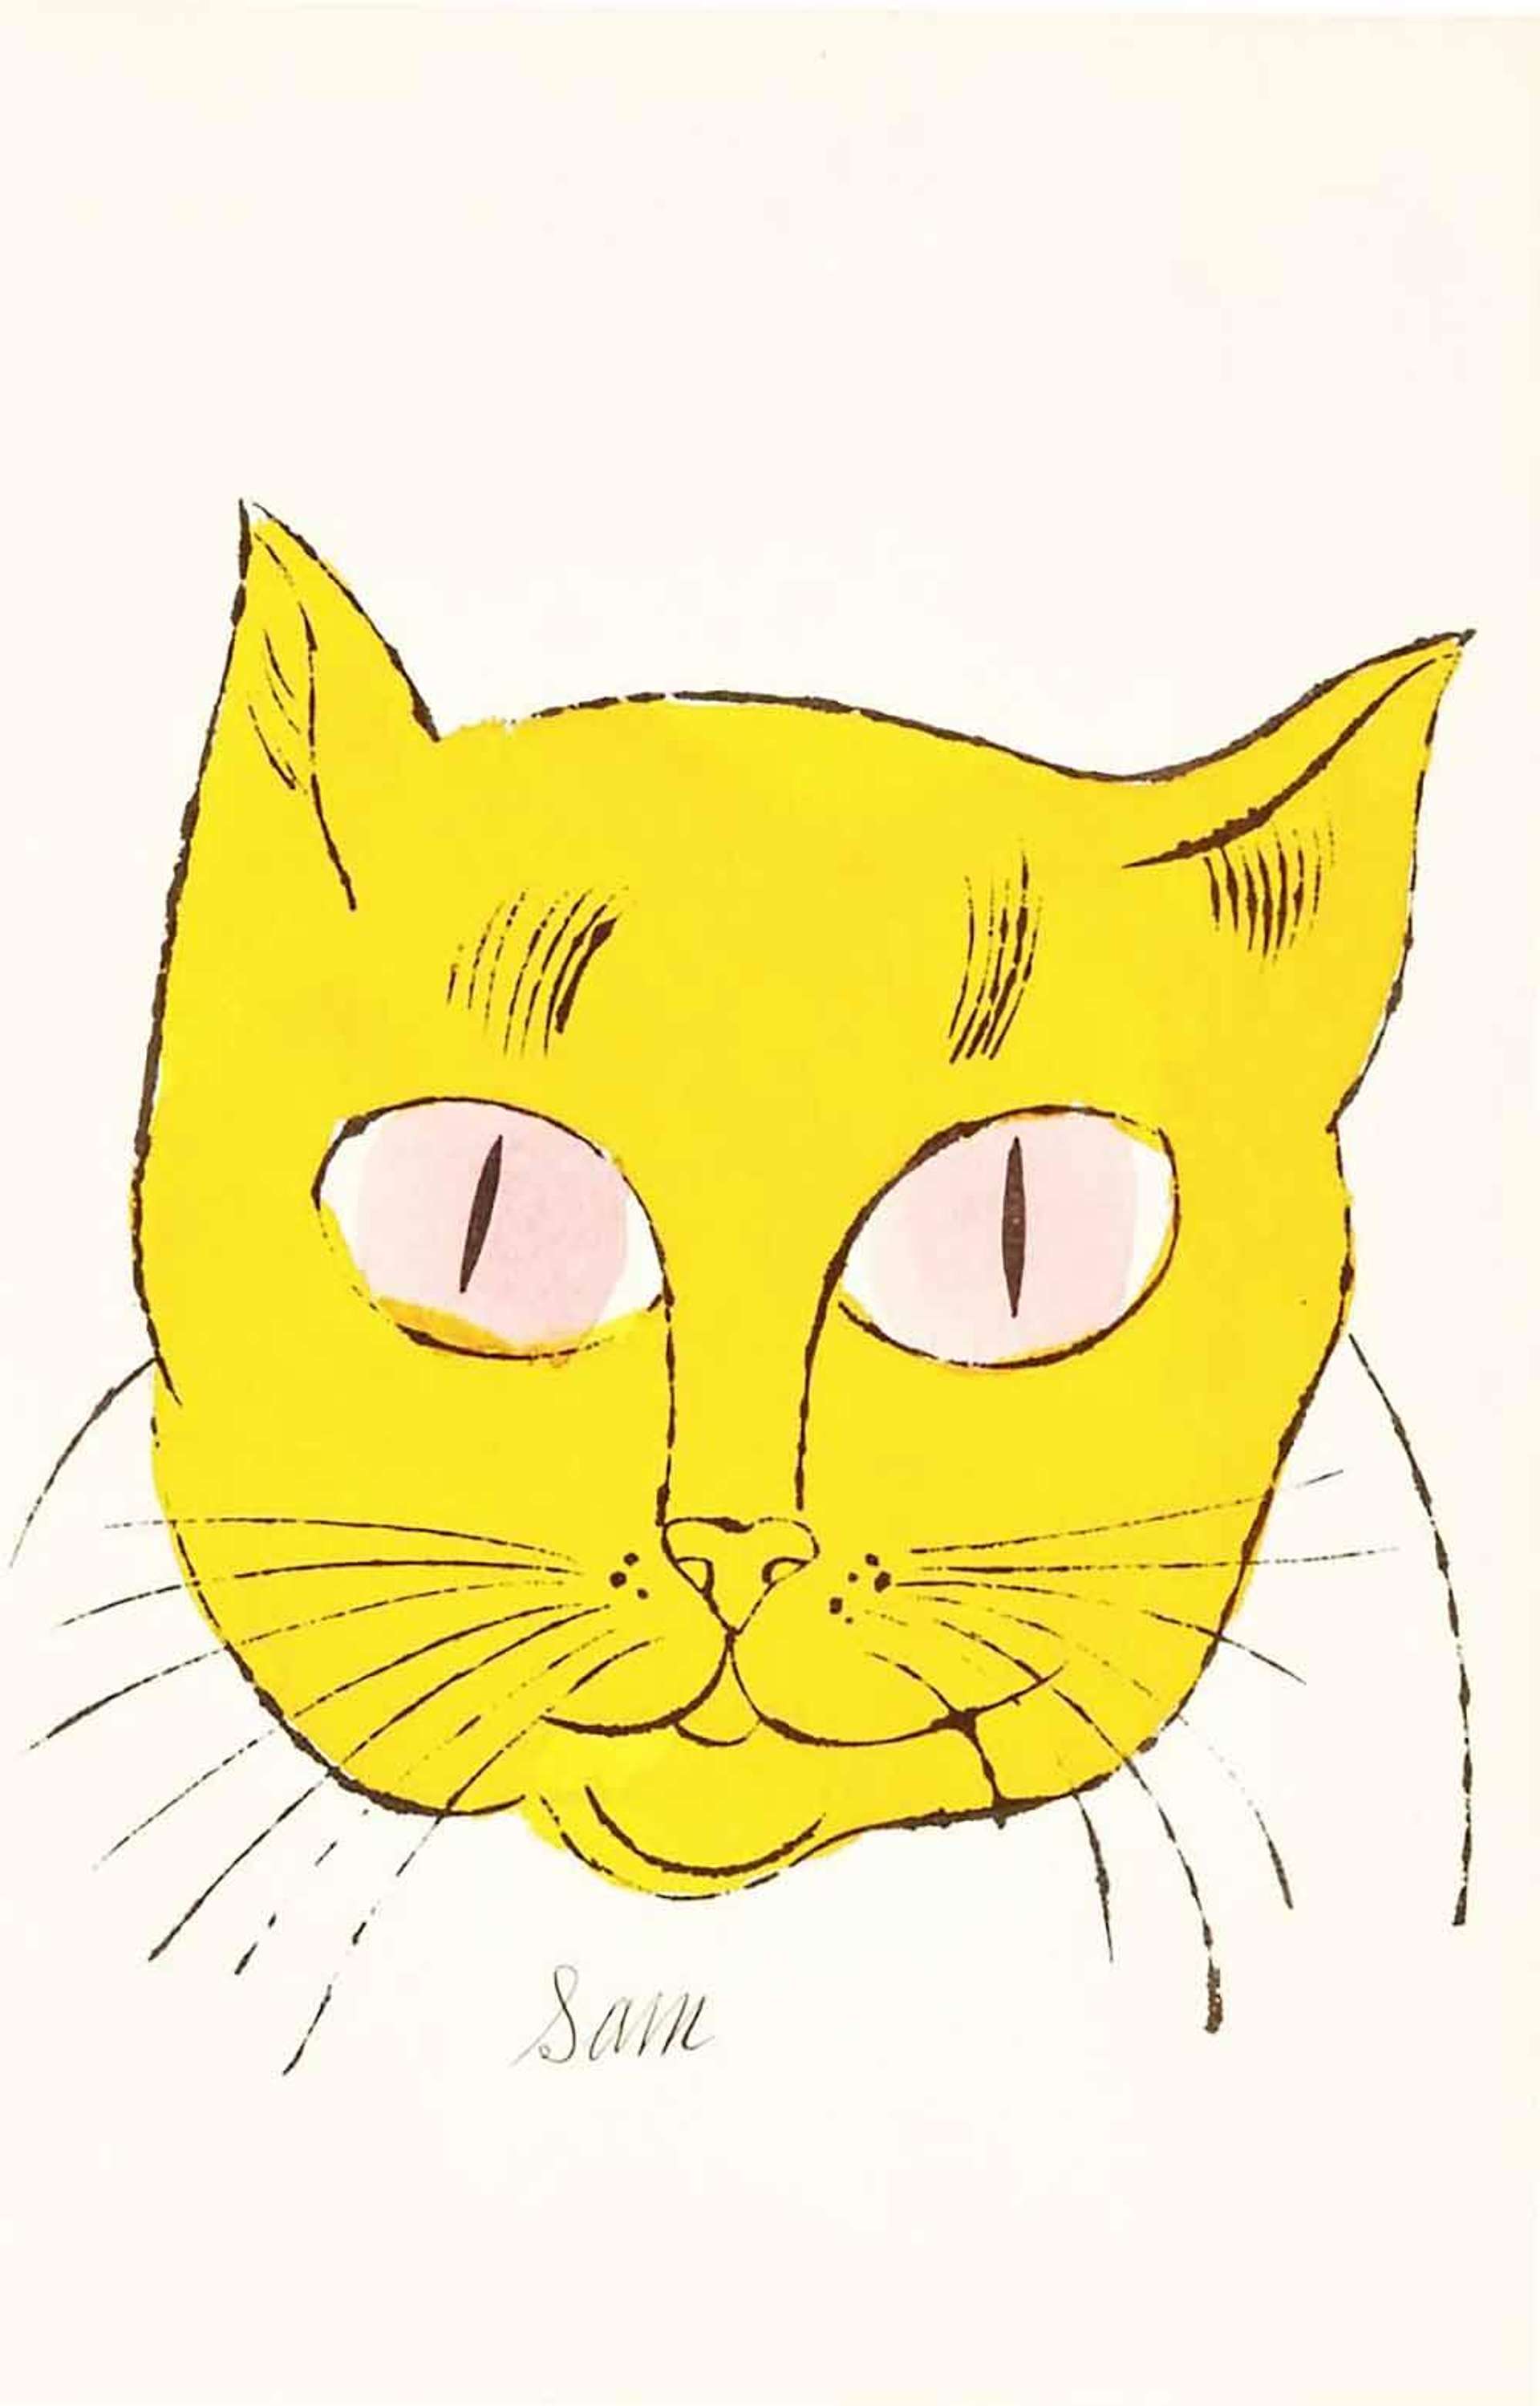 Cats Named Sam IV 58 by Andy Warhol